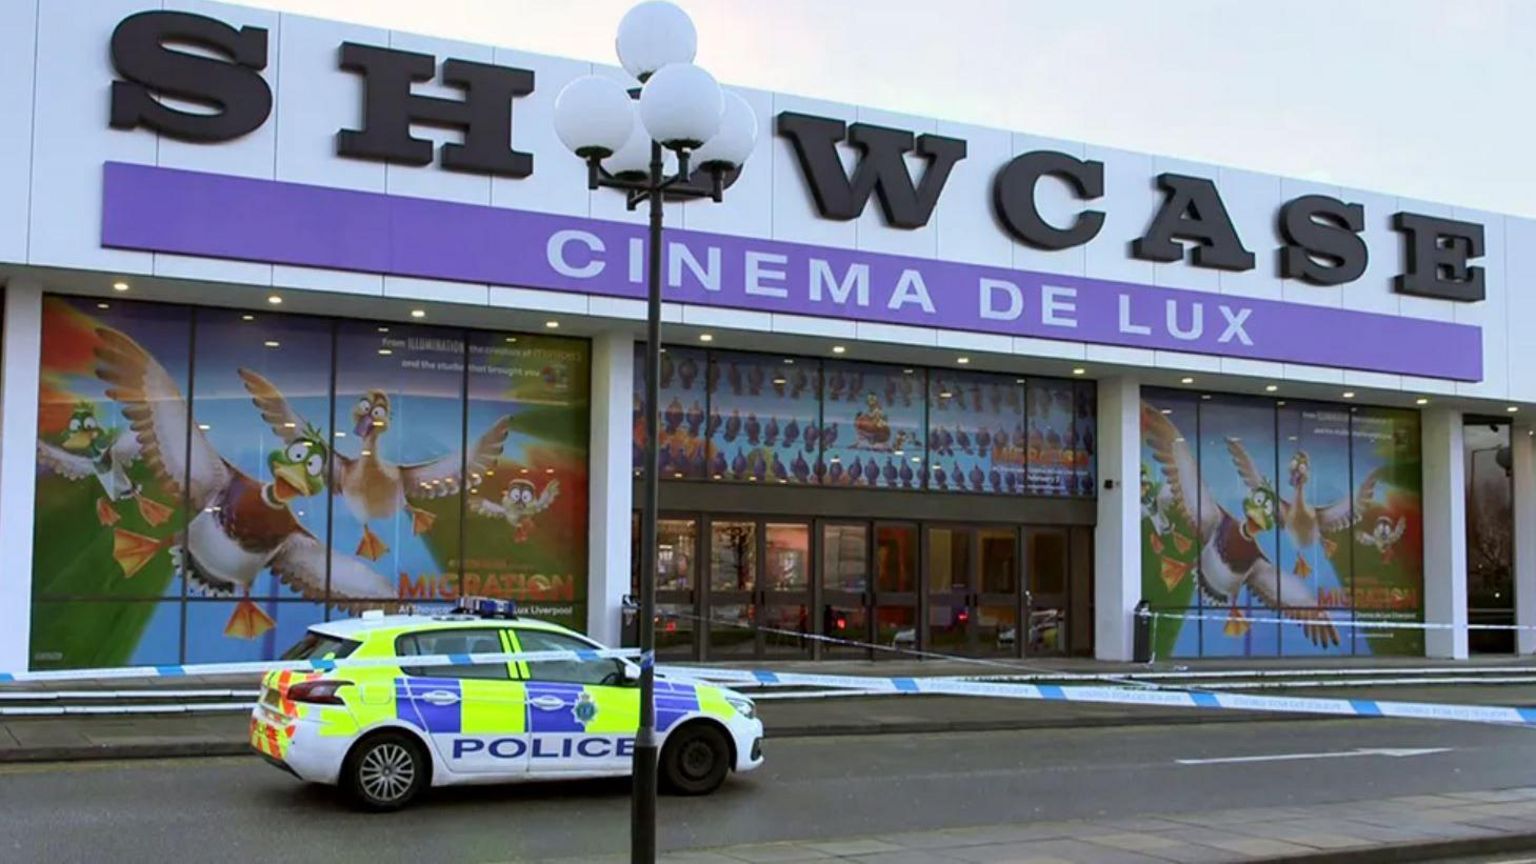 Police car outside Showcase cinema at time of incident